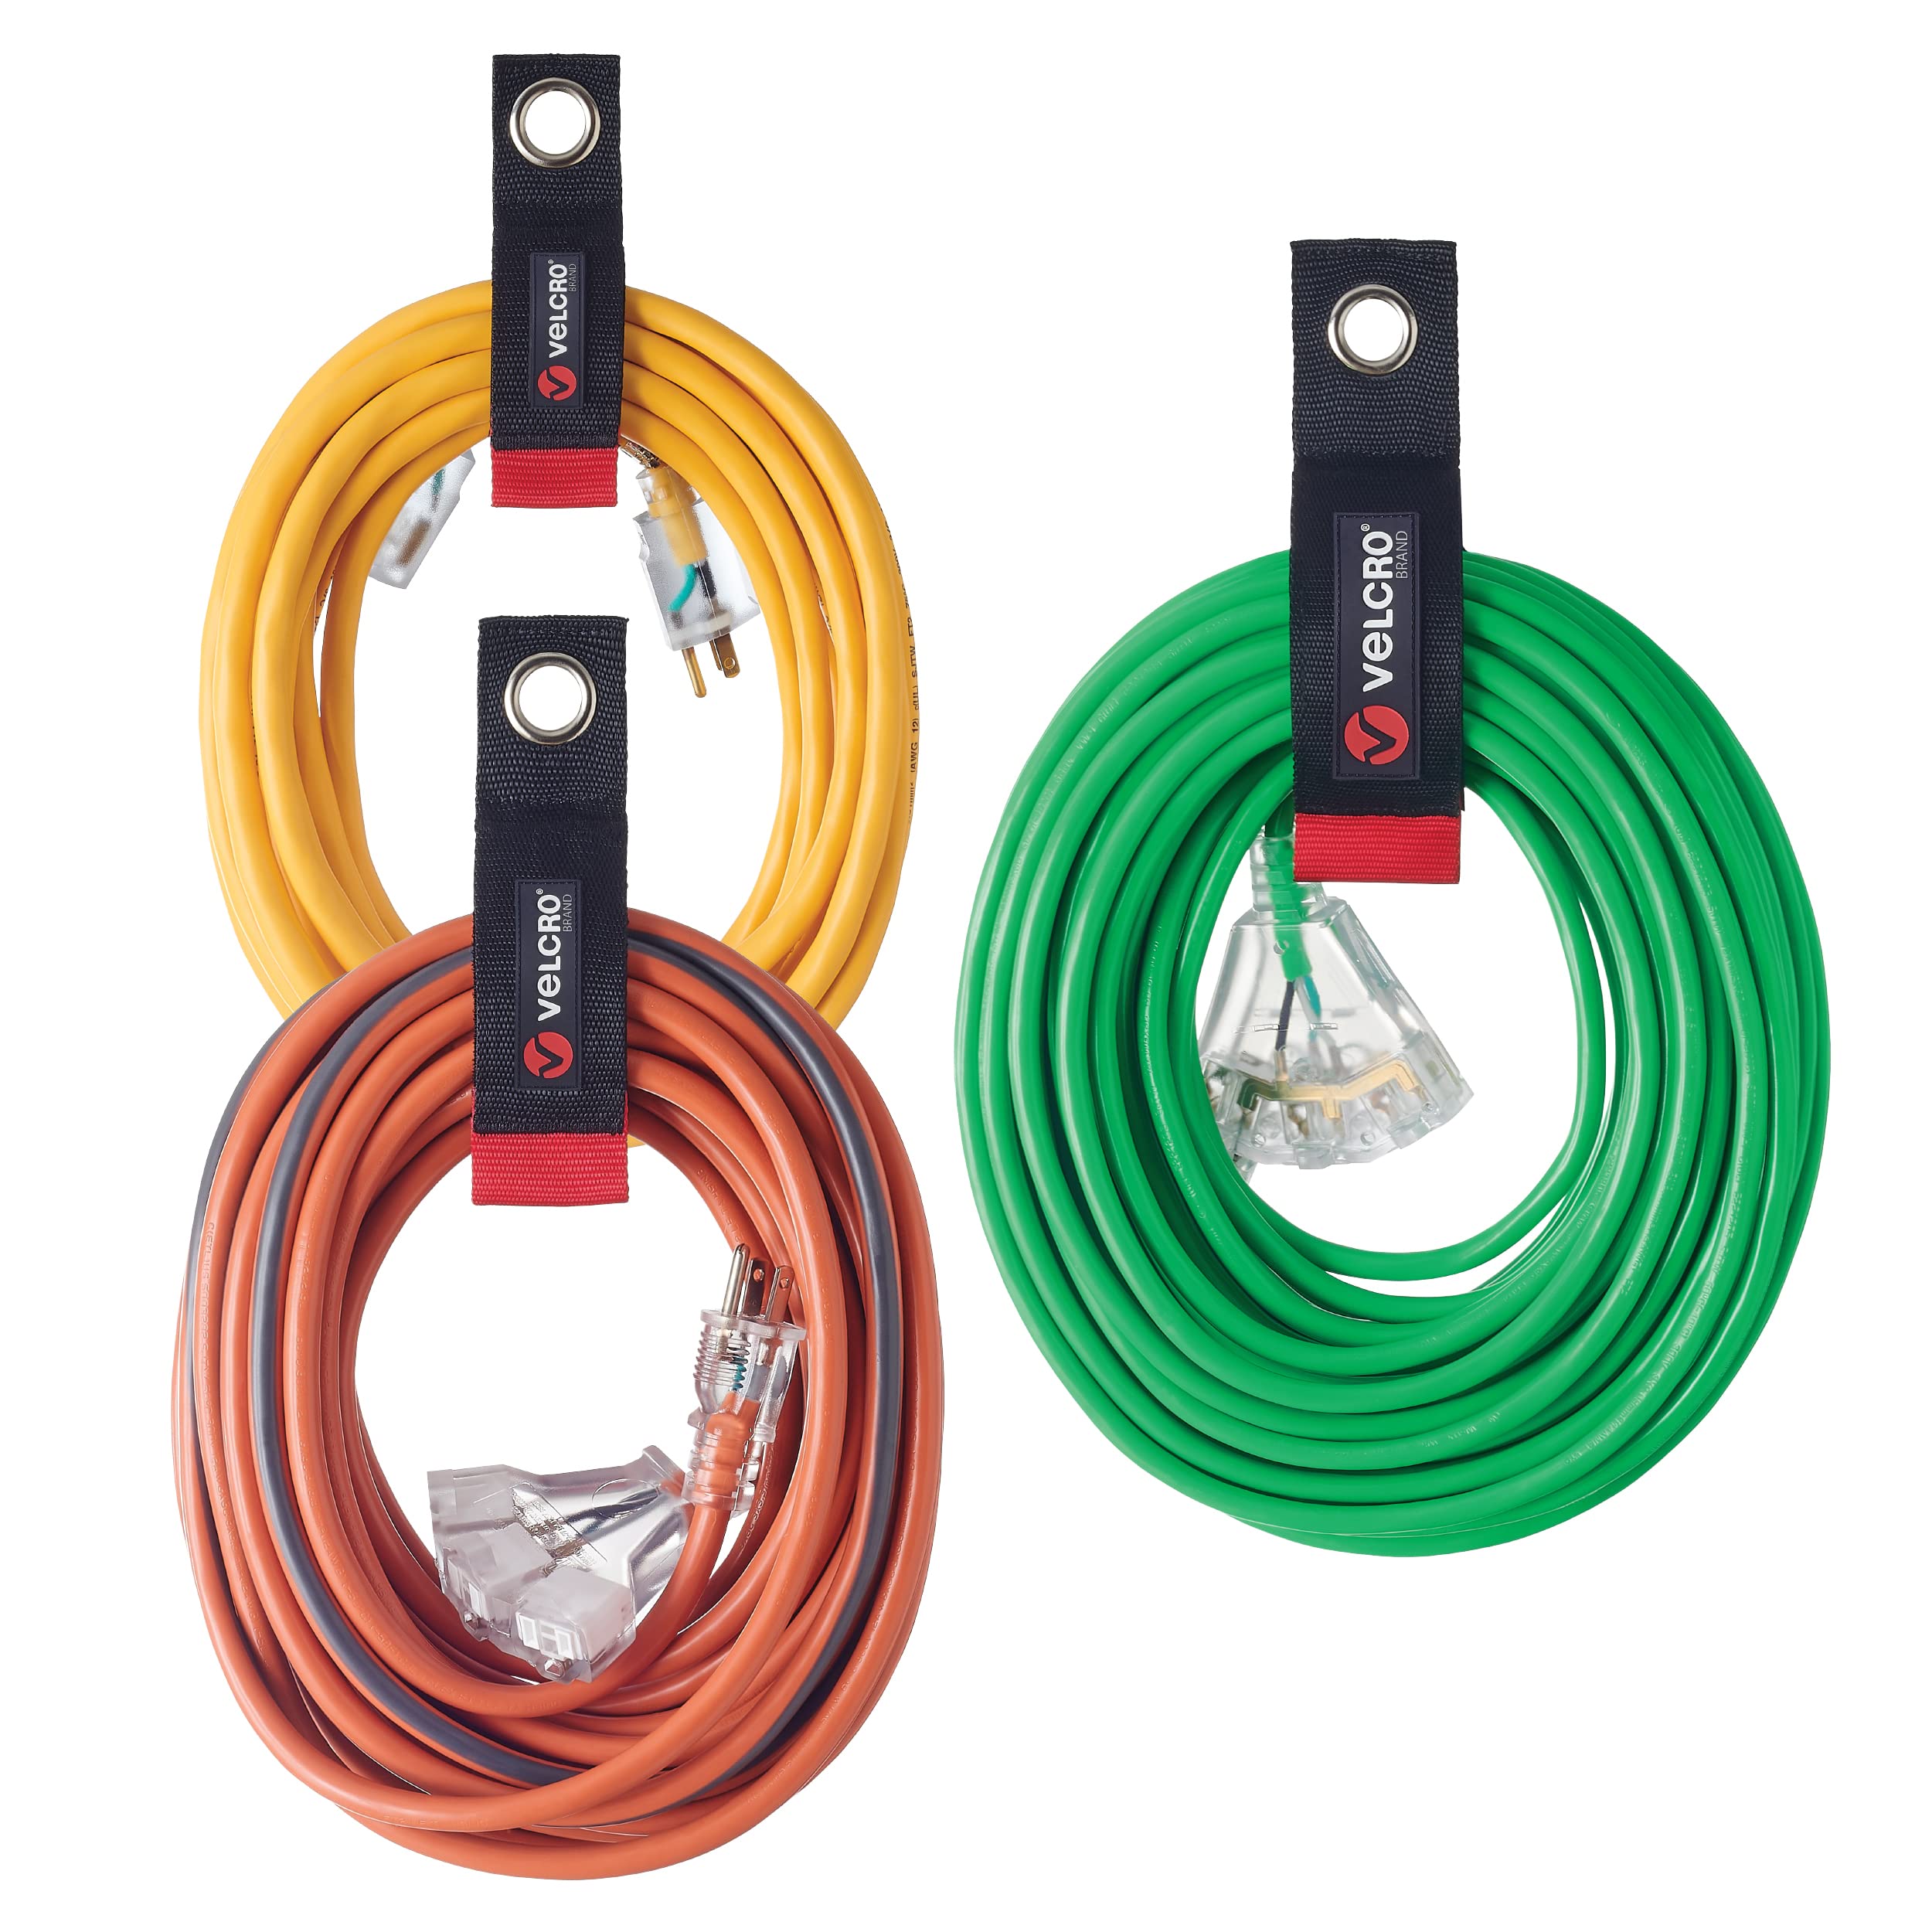 VELCRO Brand Easy Hang Extension Cord Holder Organizer Variety Pack | Holds 60-100lbs, Heavy Duty Straps Fit Easily on Hooks or Nails | Perfect for Garage Organization | 3-pk 10